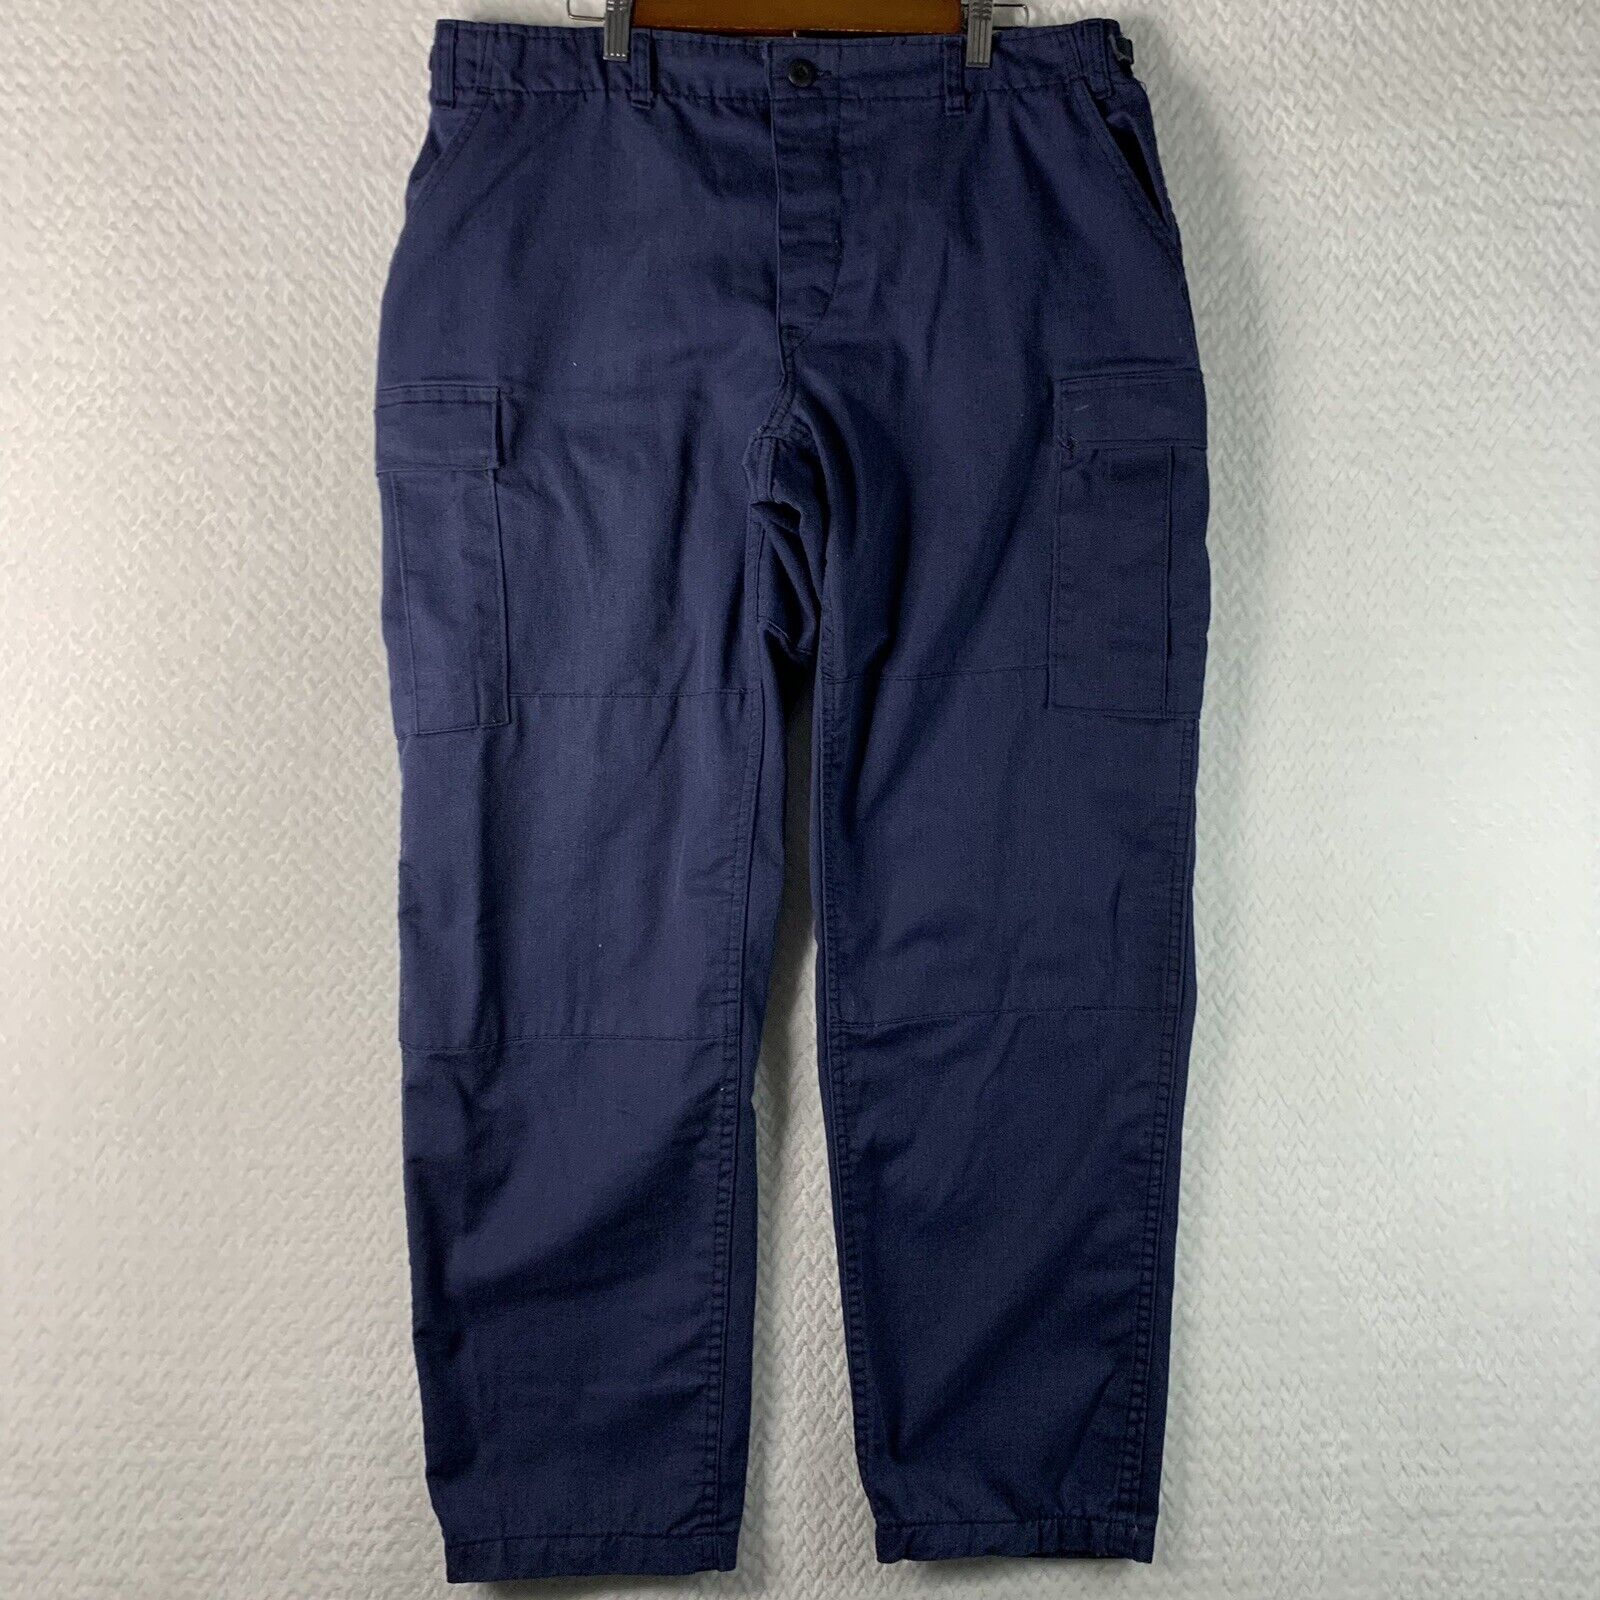 Rothco Military Tactical  BDU Fatigue Pants Size Large Long Blue